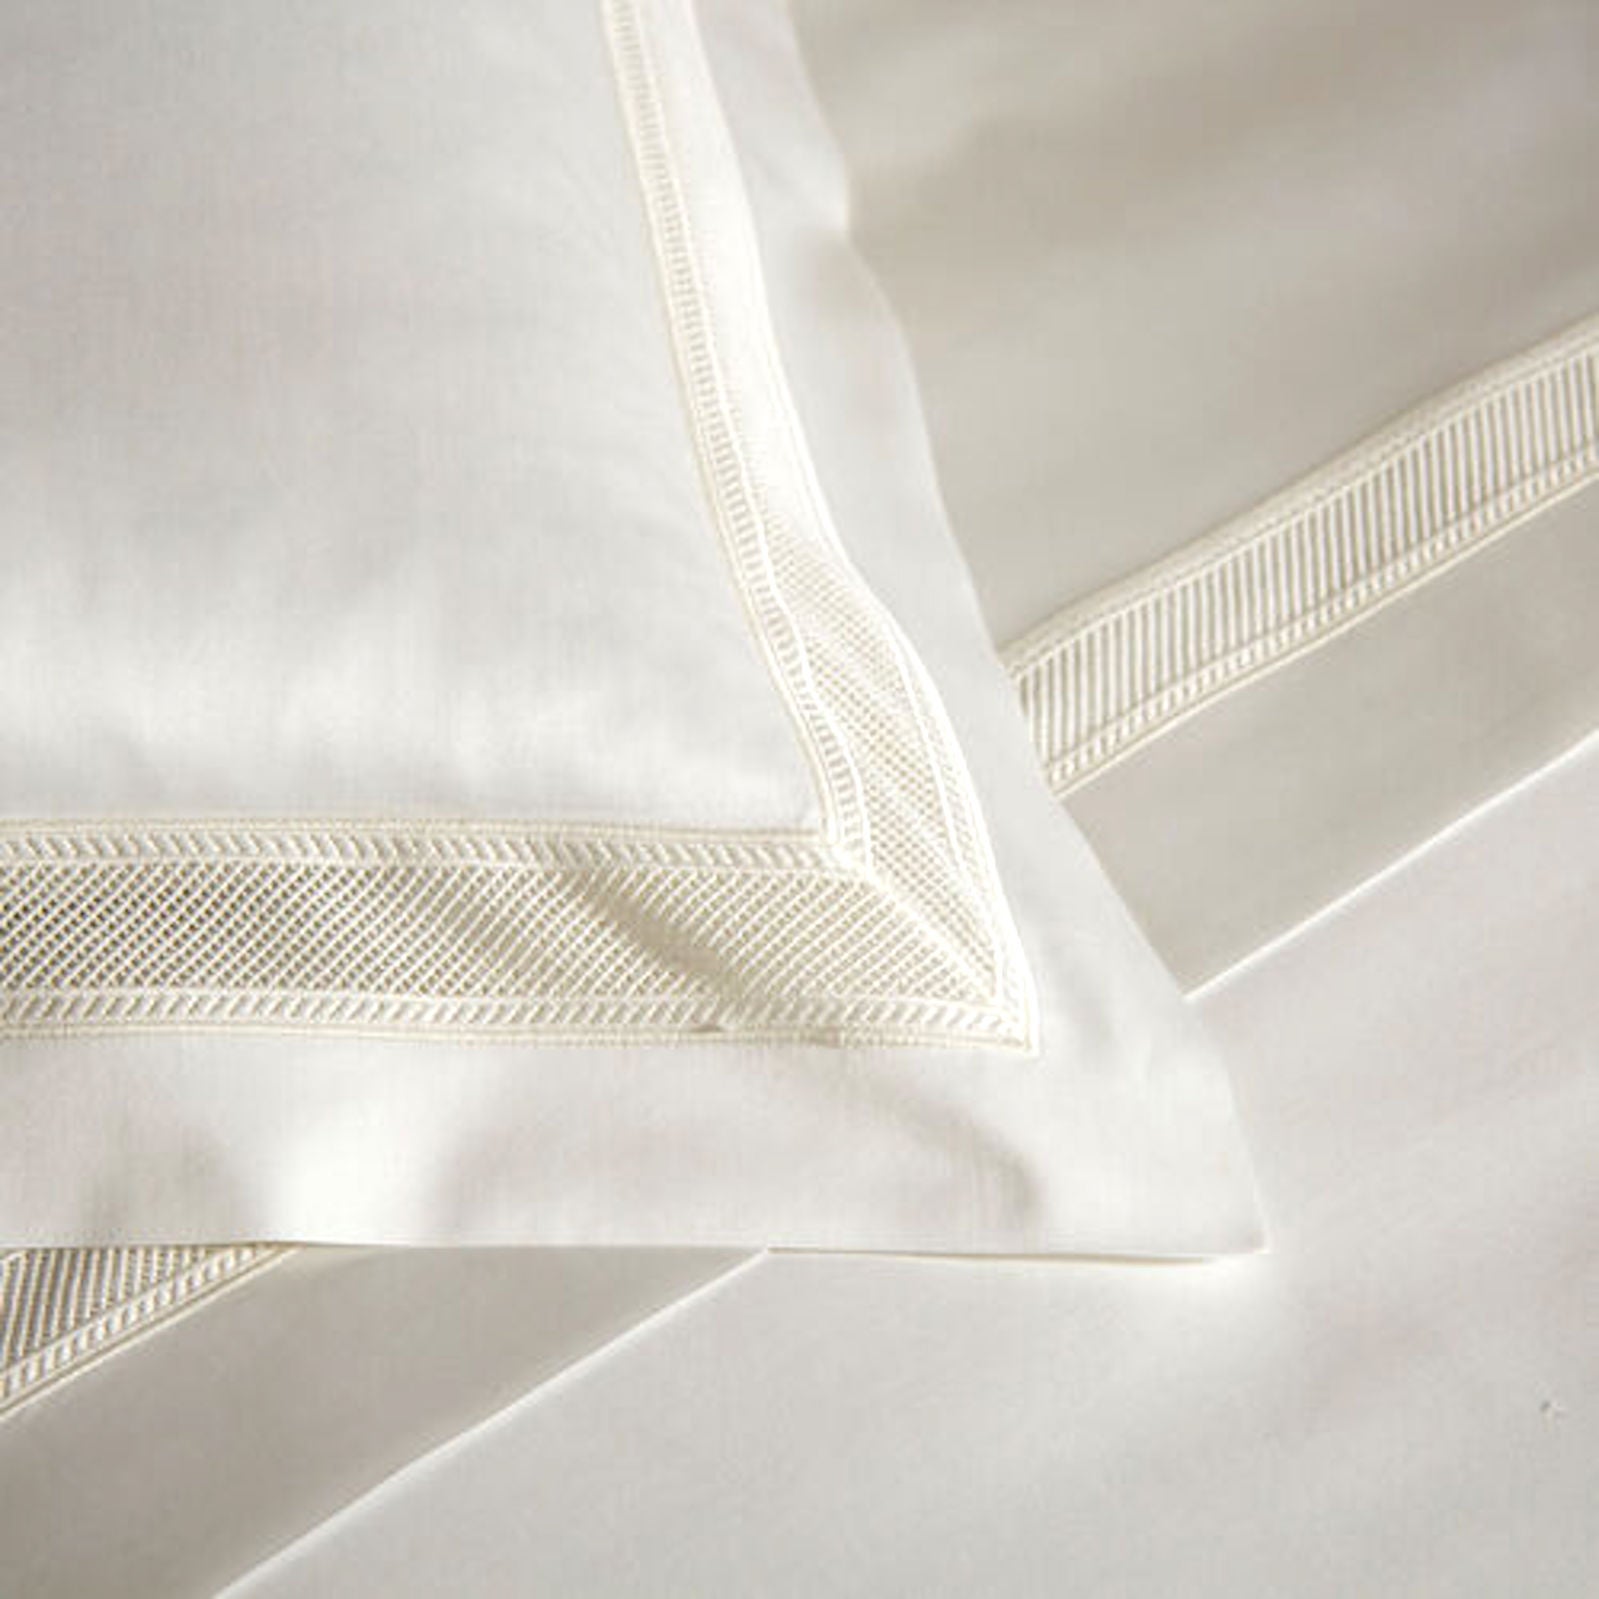 The Net Lace Sheet Set offers a sumptuous feel while bringing timeless elegance to your bedroom. Crafted from cotton sateen, this sheet set is silky smooth and of impeccable quality so you can take pleasure in a peaceful night's sleep.

Slip